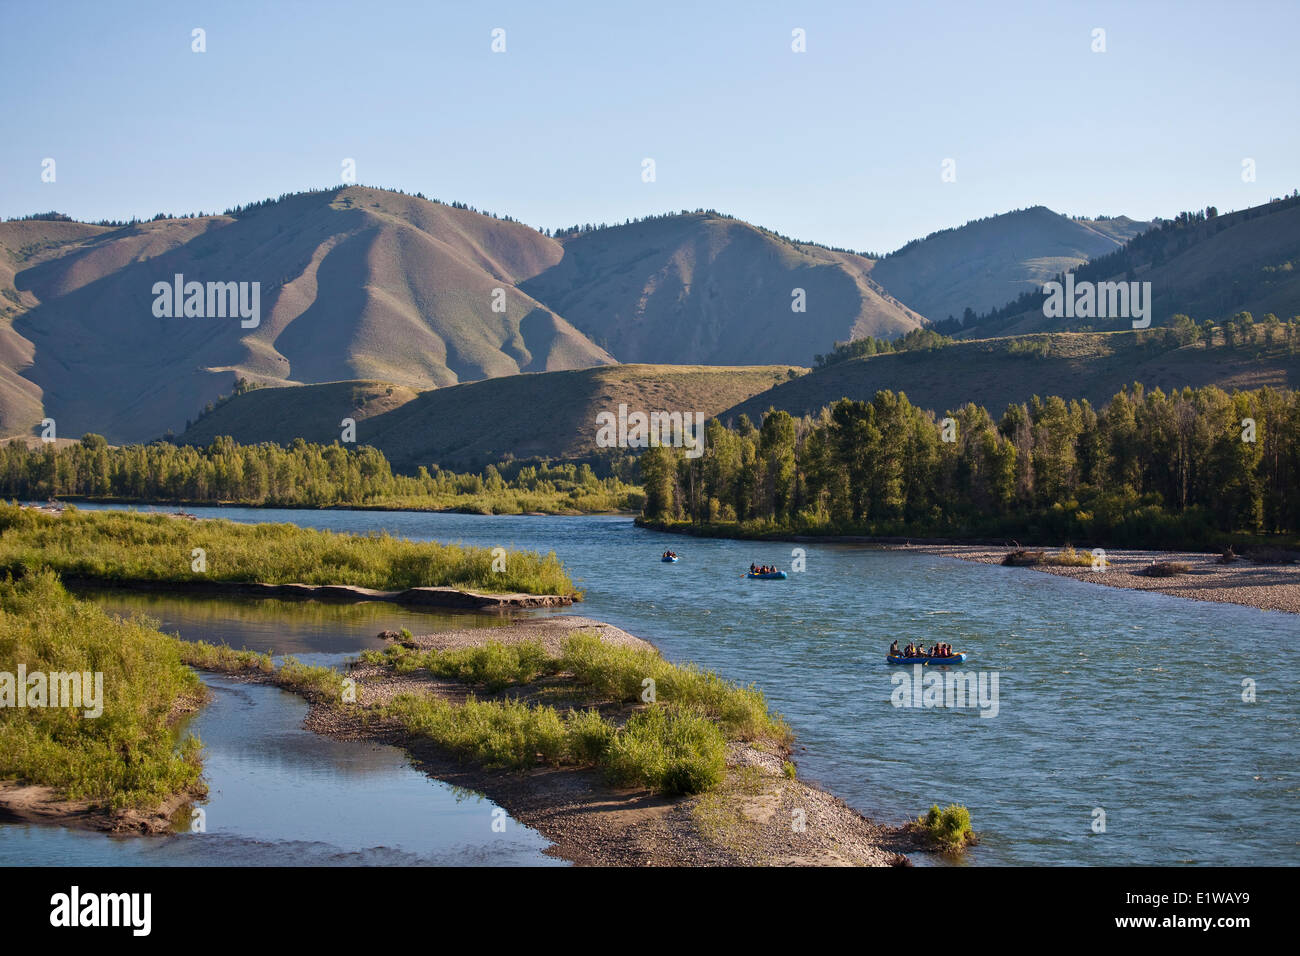 Whitewater rafting on the Snake River, Jackson Hole, WY Stock Photo